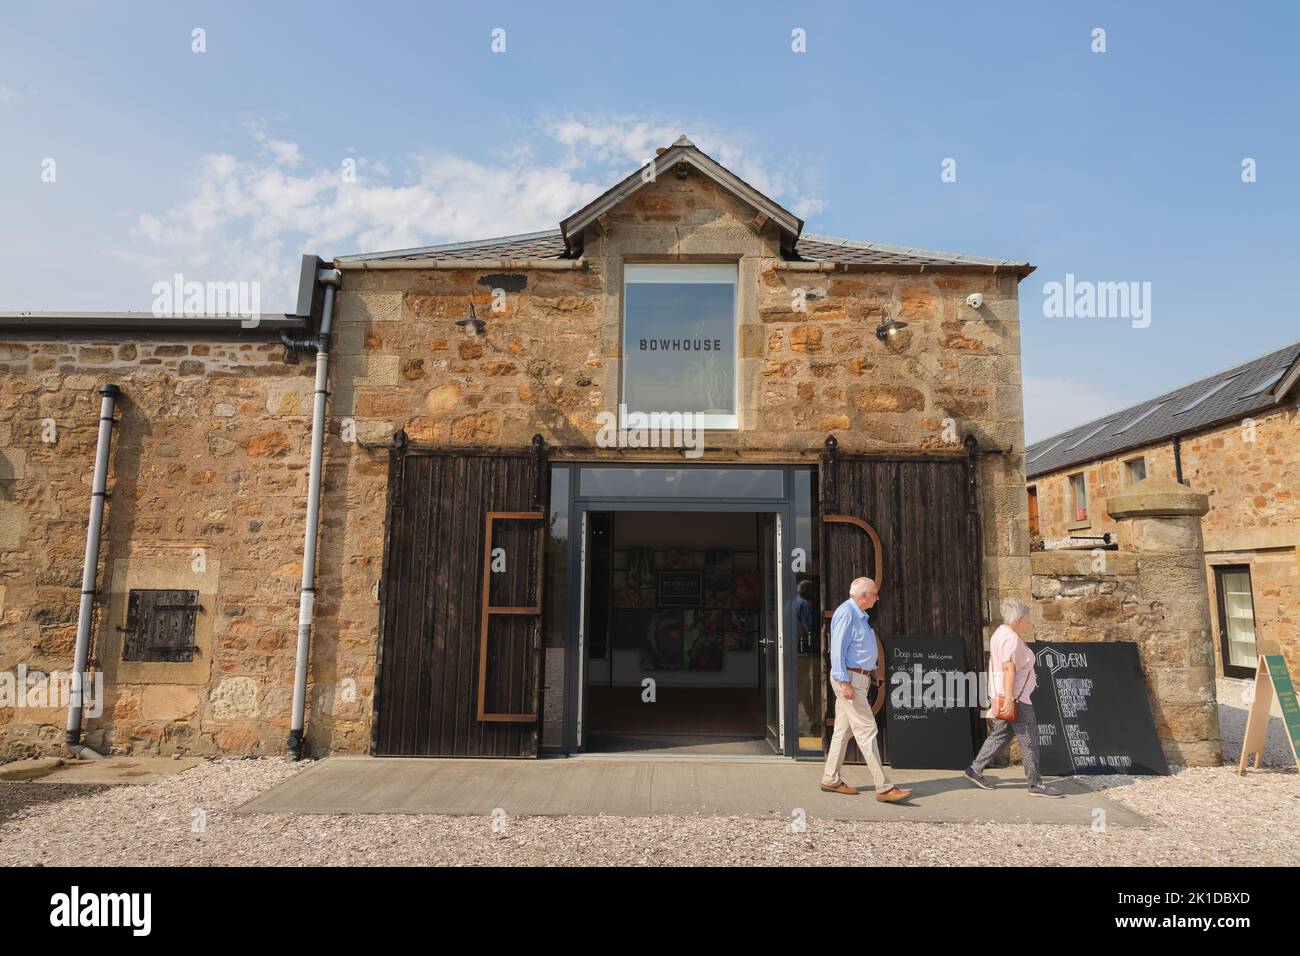 East Neuk, UK - August 14, 2022: An elderly couple visits the rural country Bowhouse Farmer's Market at East Neuk in Fife, Scotland. Stock Photo